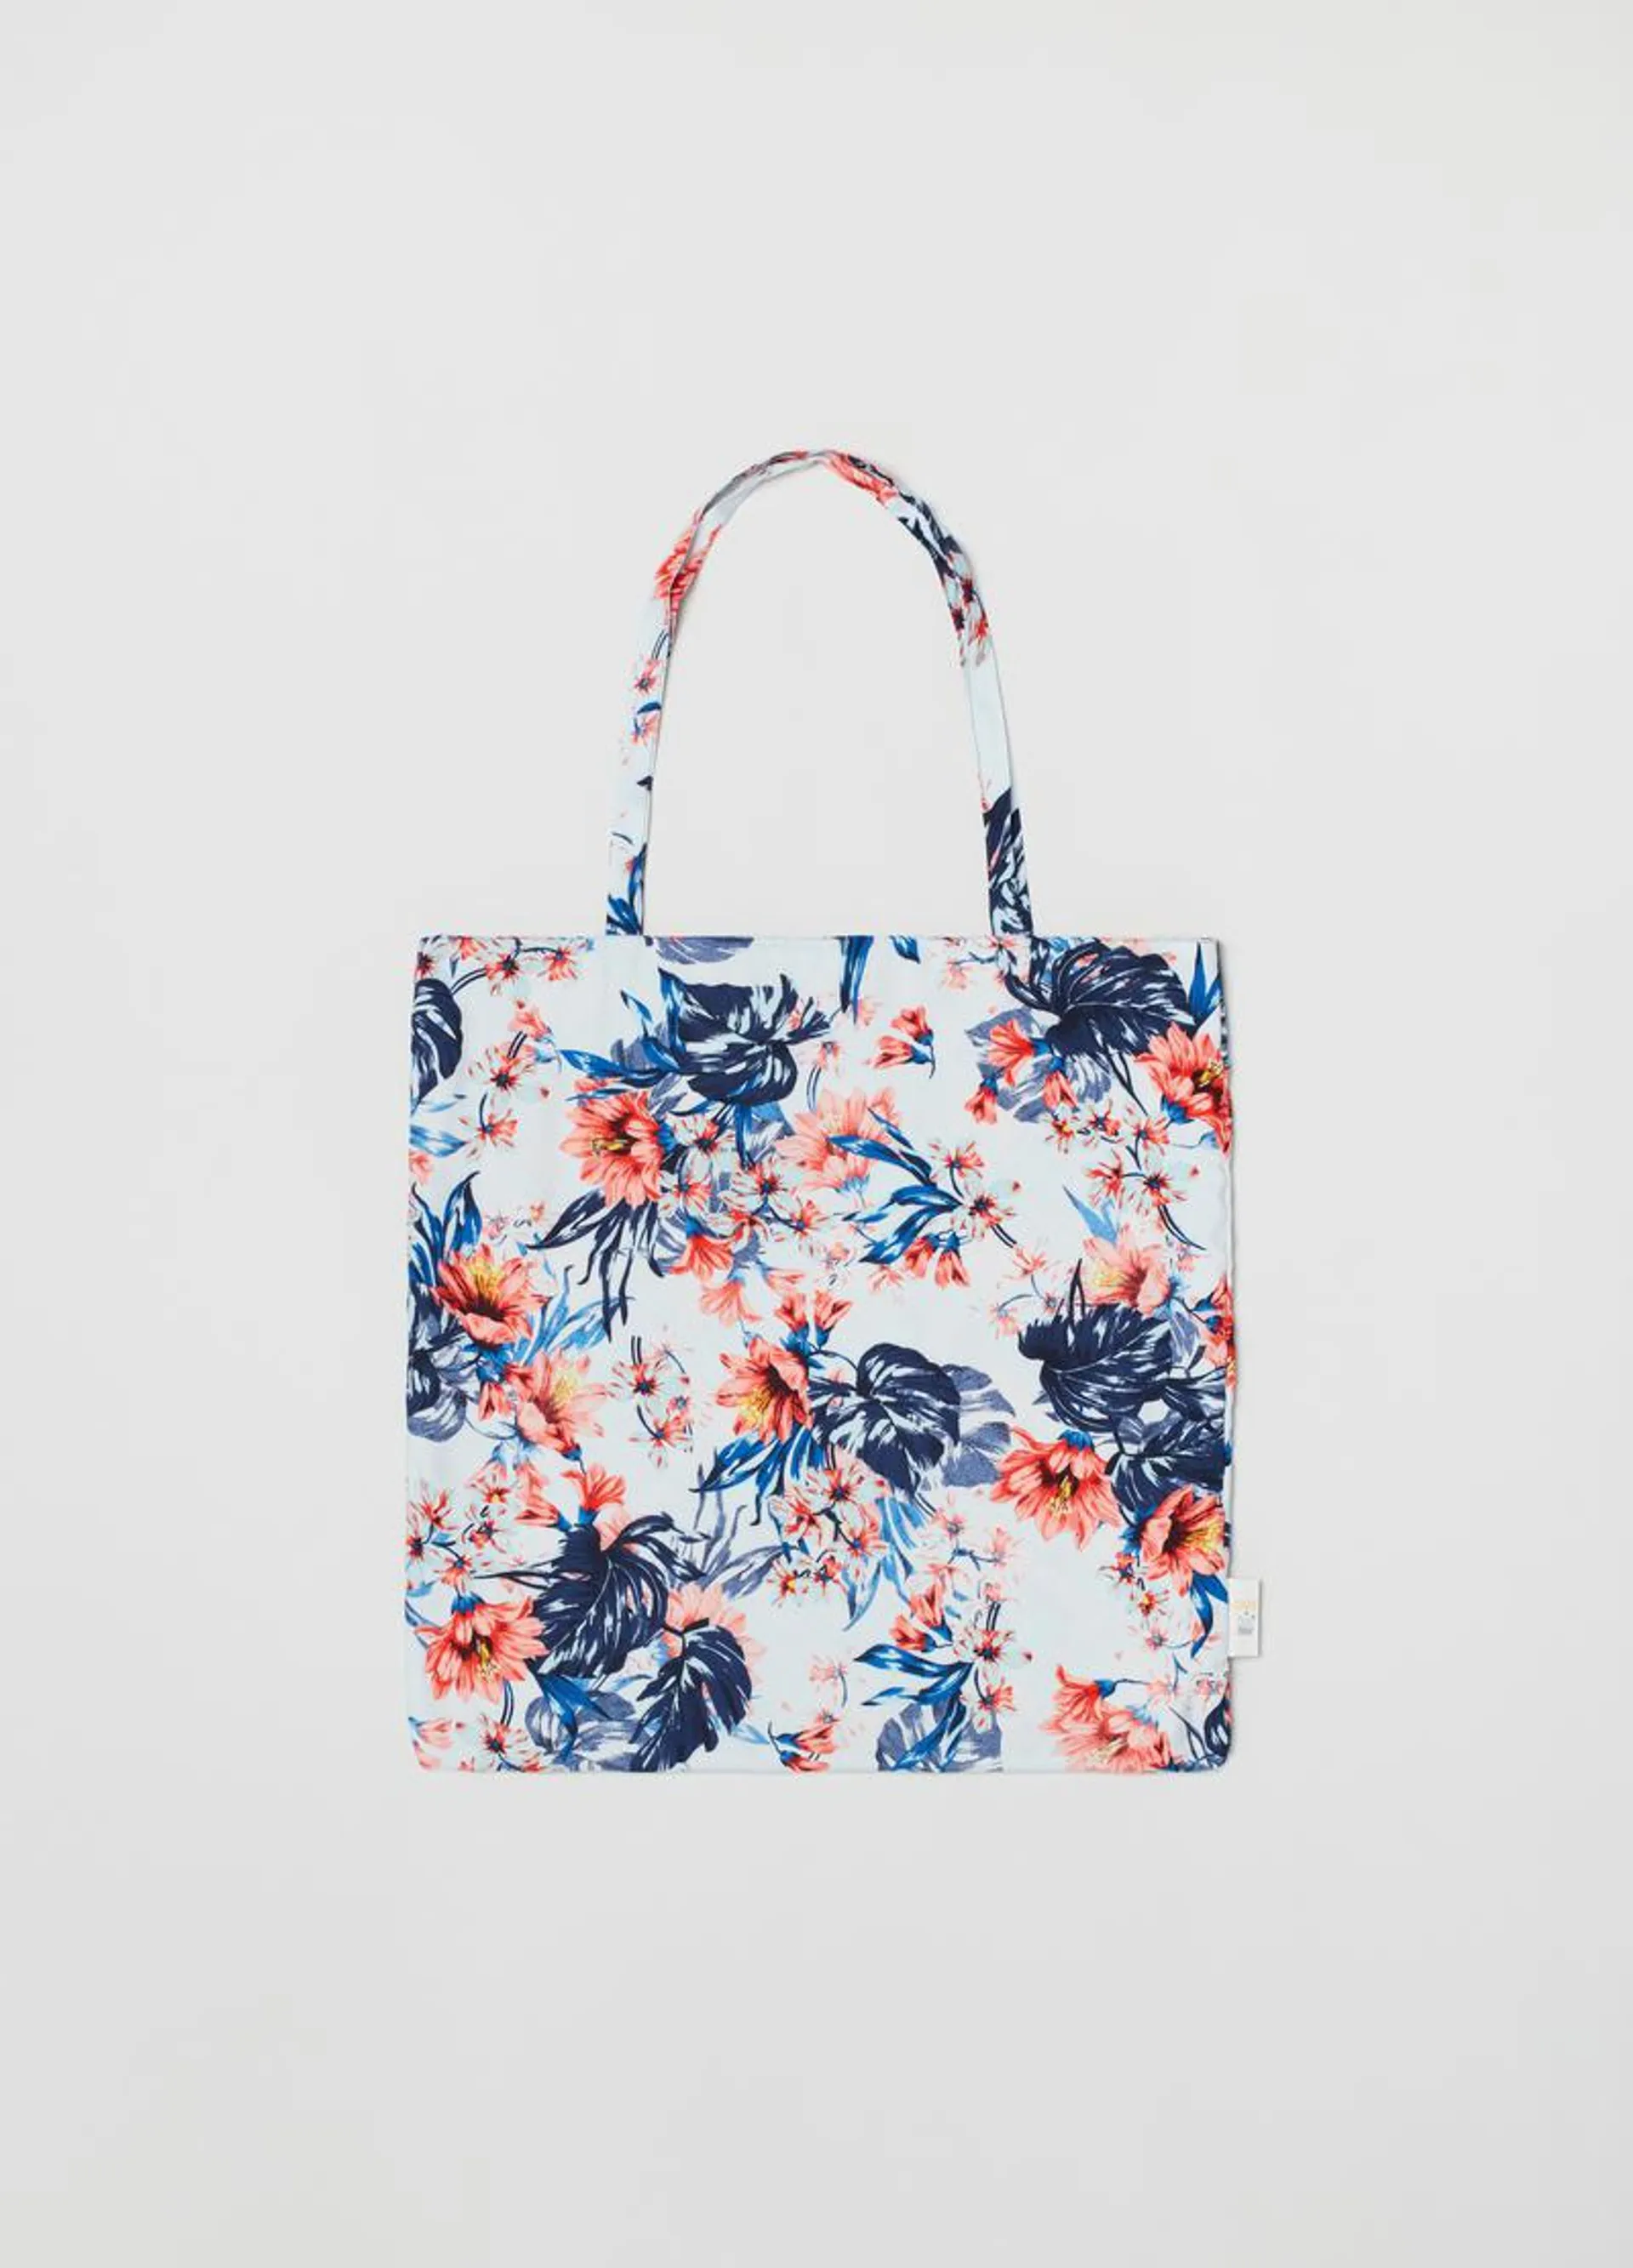 Quid shopping bag with print